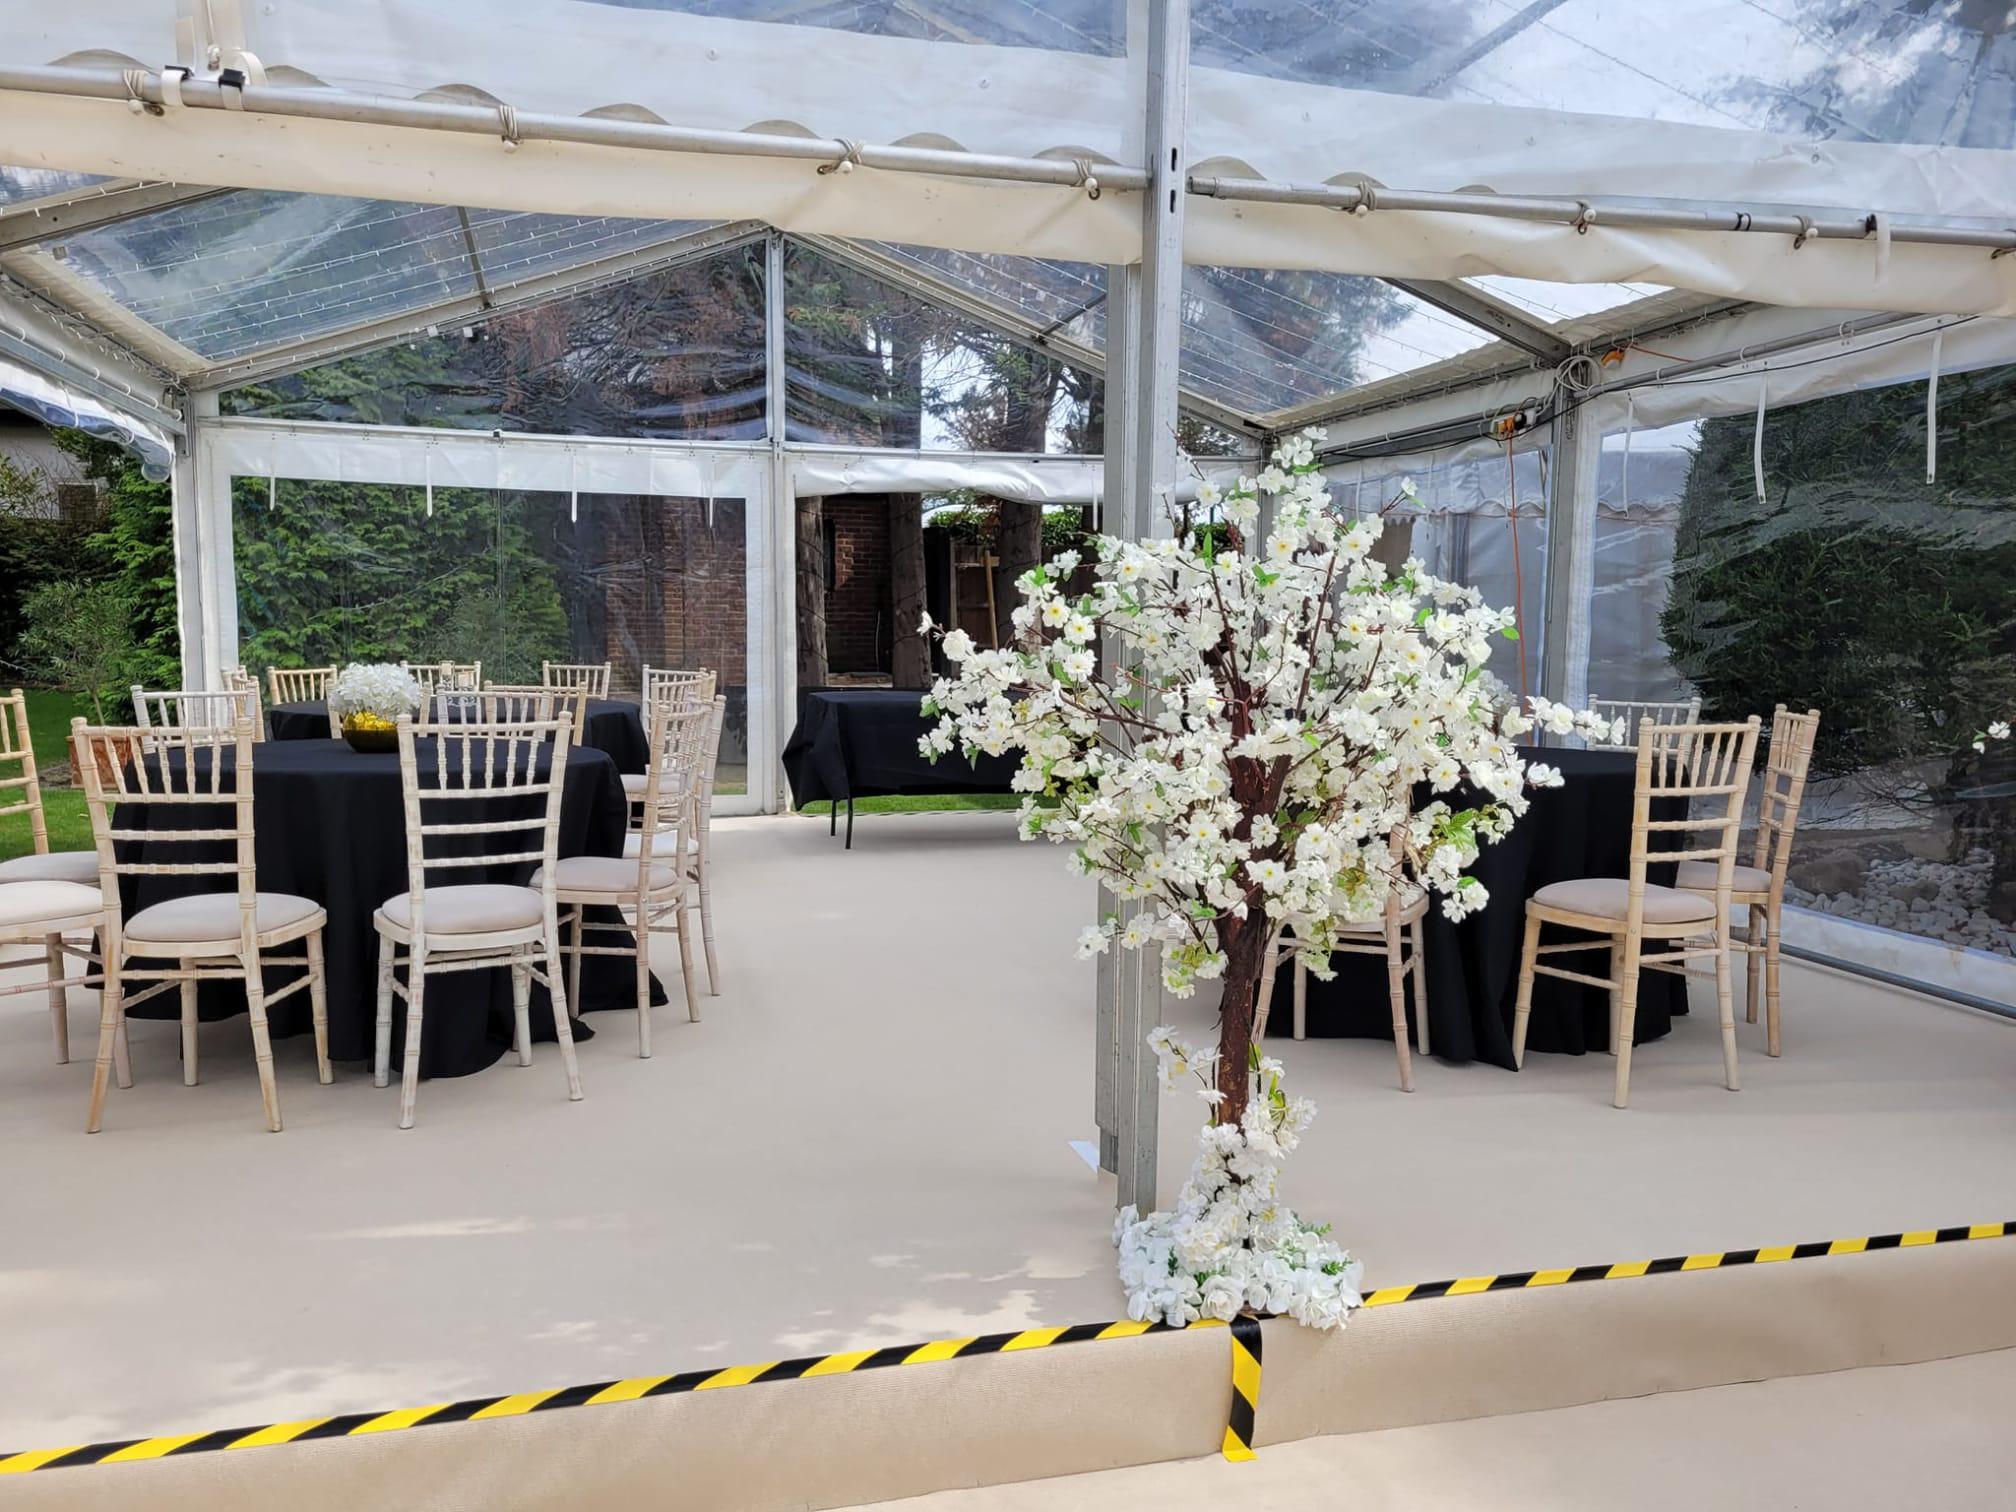 Images Manny's Marquees Ltd